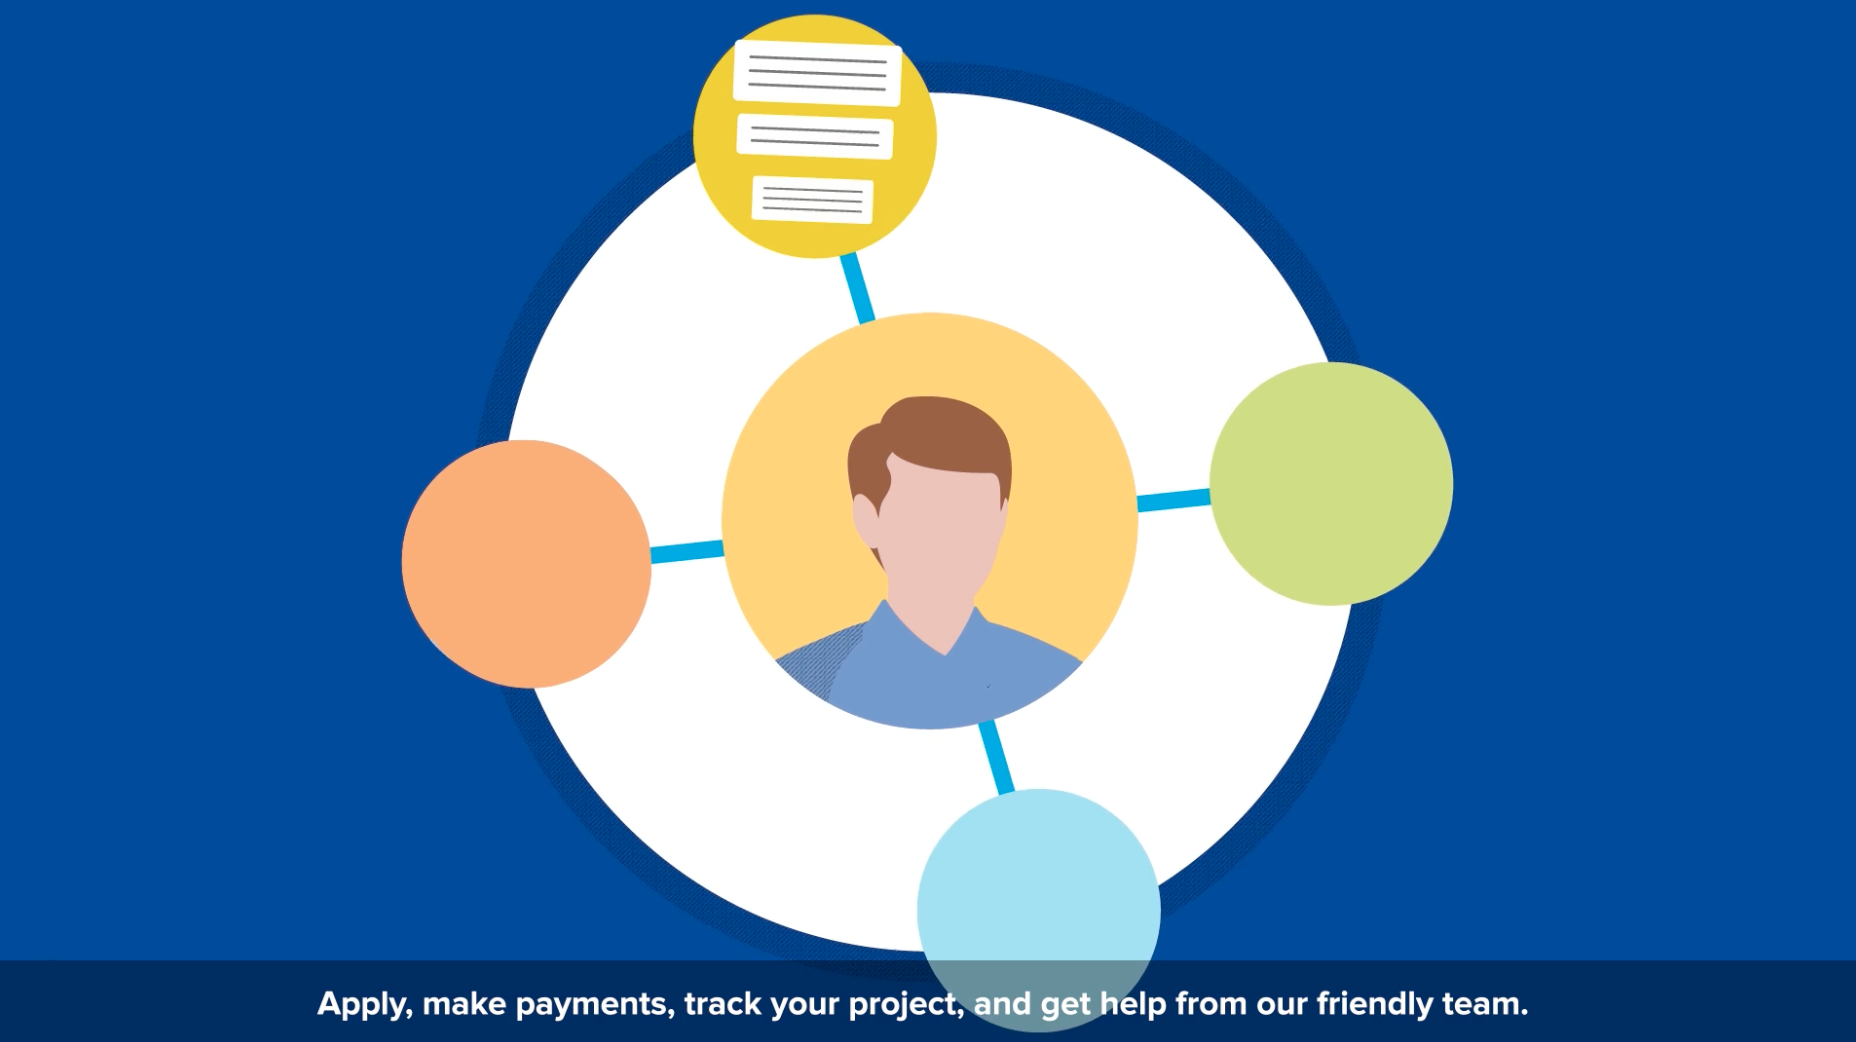 An infographic showing how to apply, make payments, track project and contact